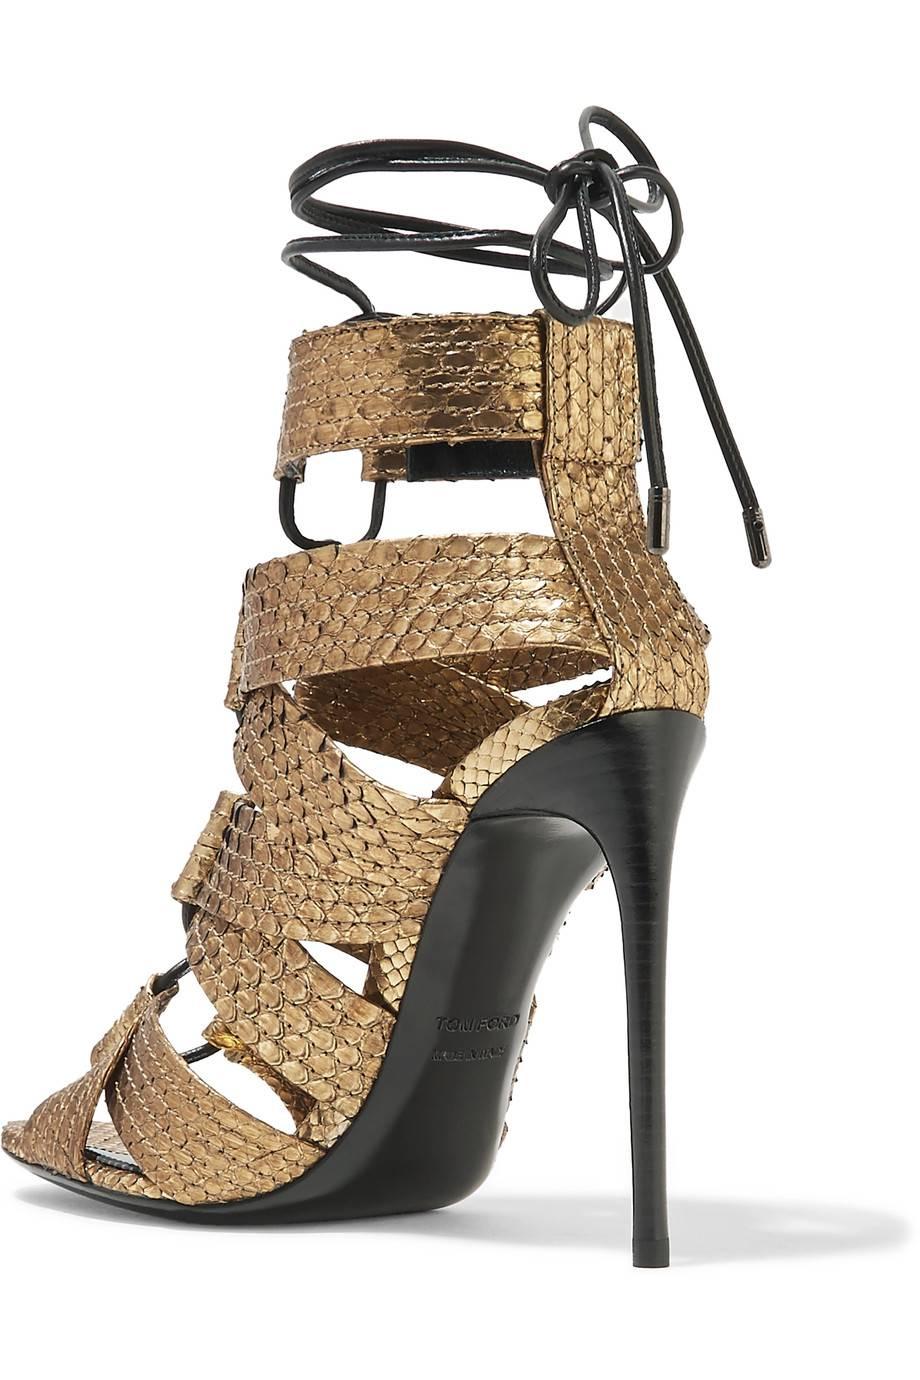 Brown Tom Ford New Sold Out Bronze Snakeskin Cut Out Evening Sandals Heels in Box